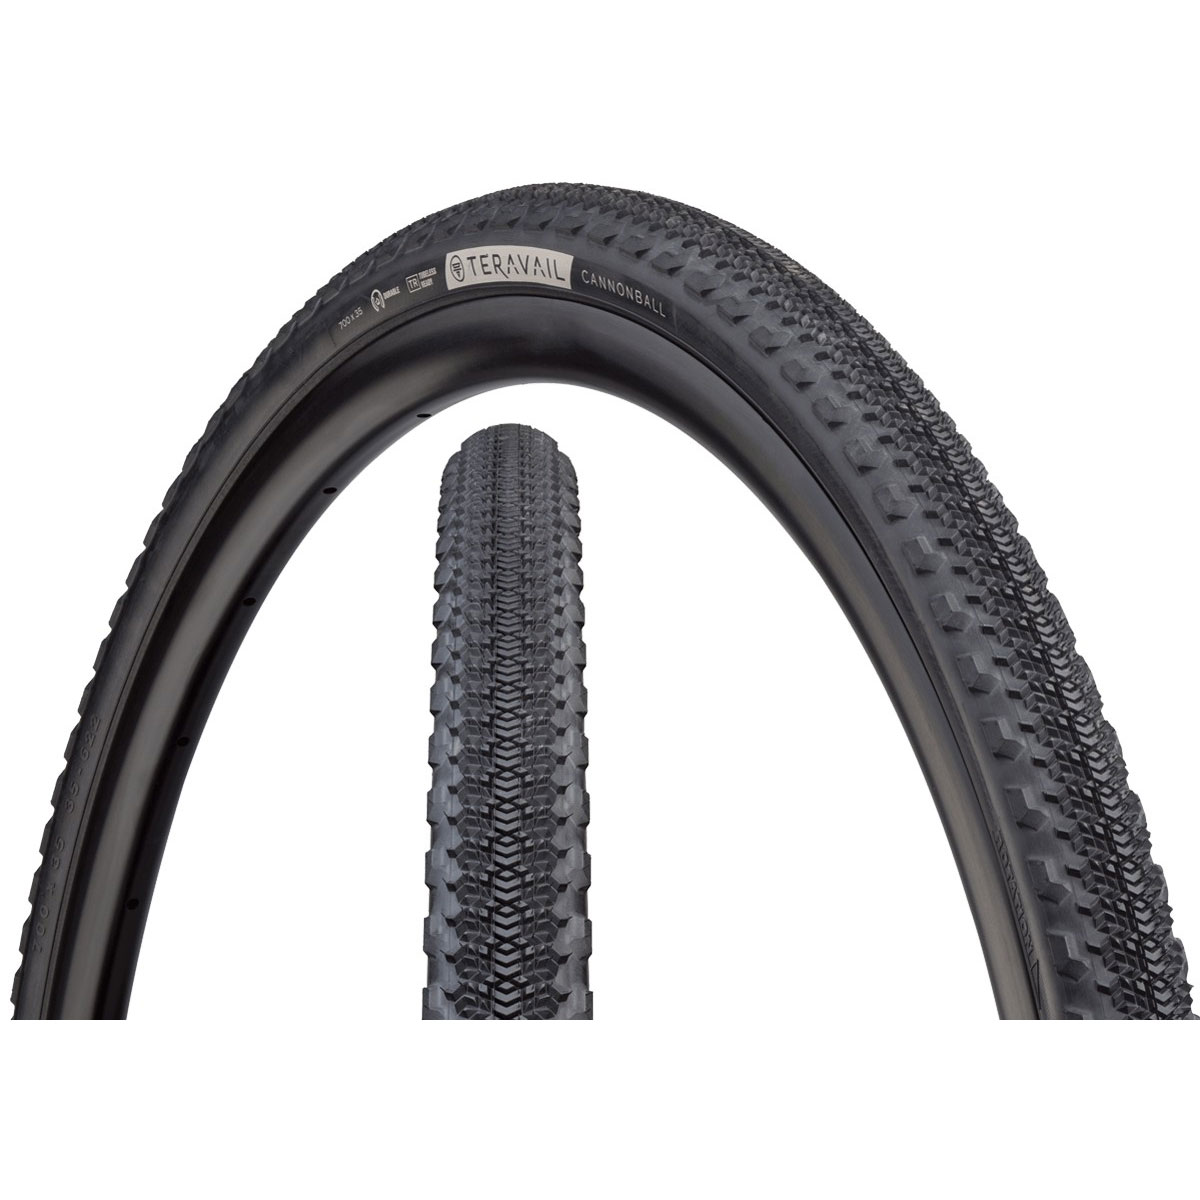 Teravail Cannonball tyres